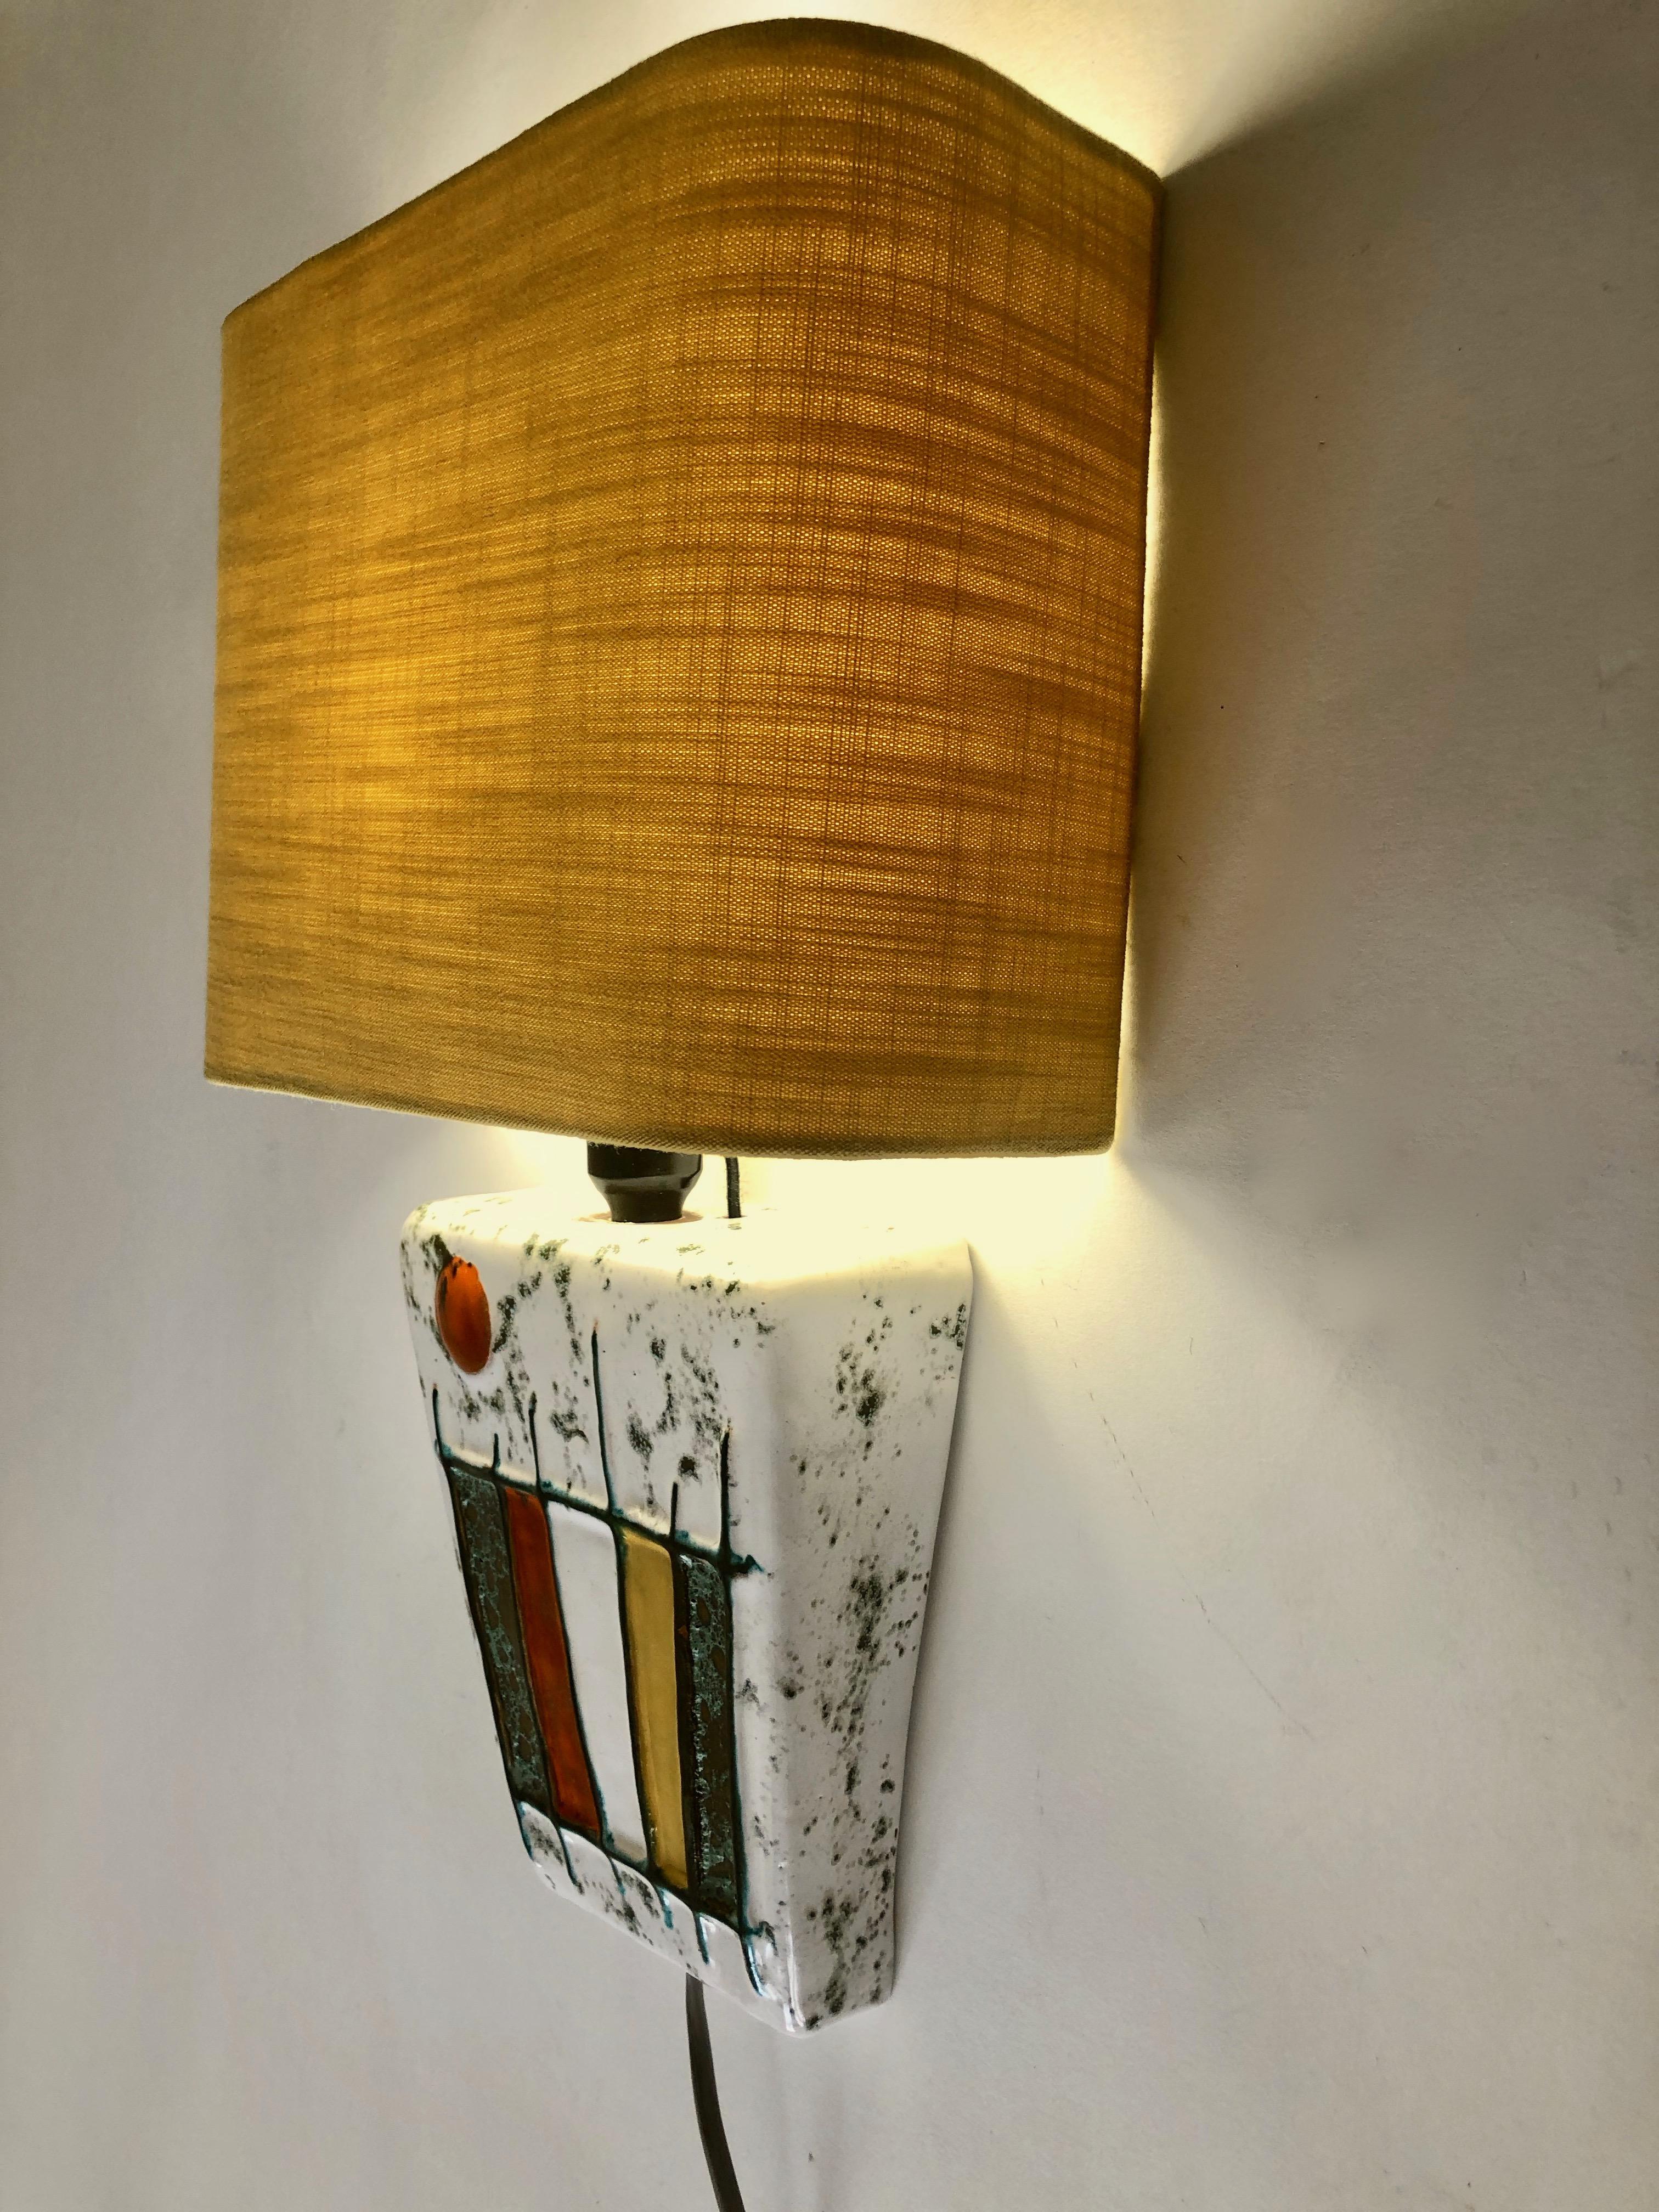 Modernist Wall Light from The Studio Ceramics Movement, 1950's, Hungary For Sale 4